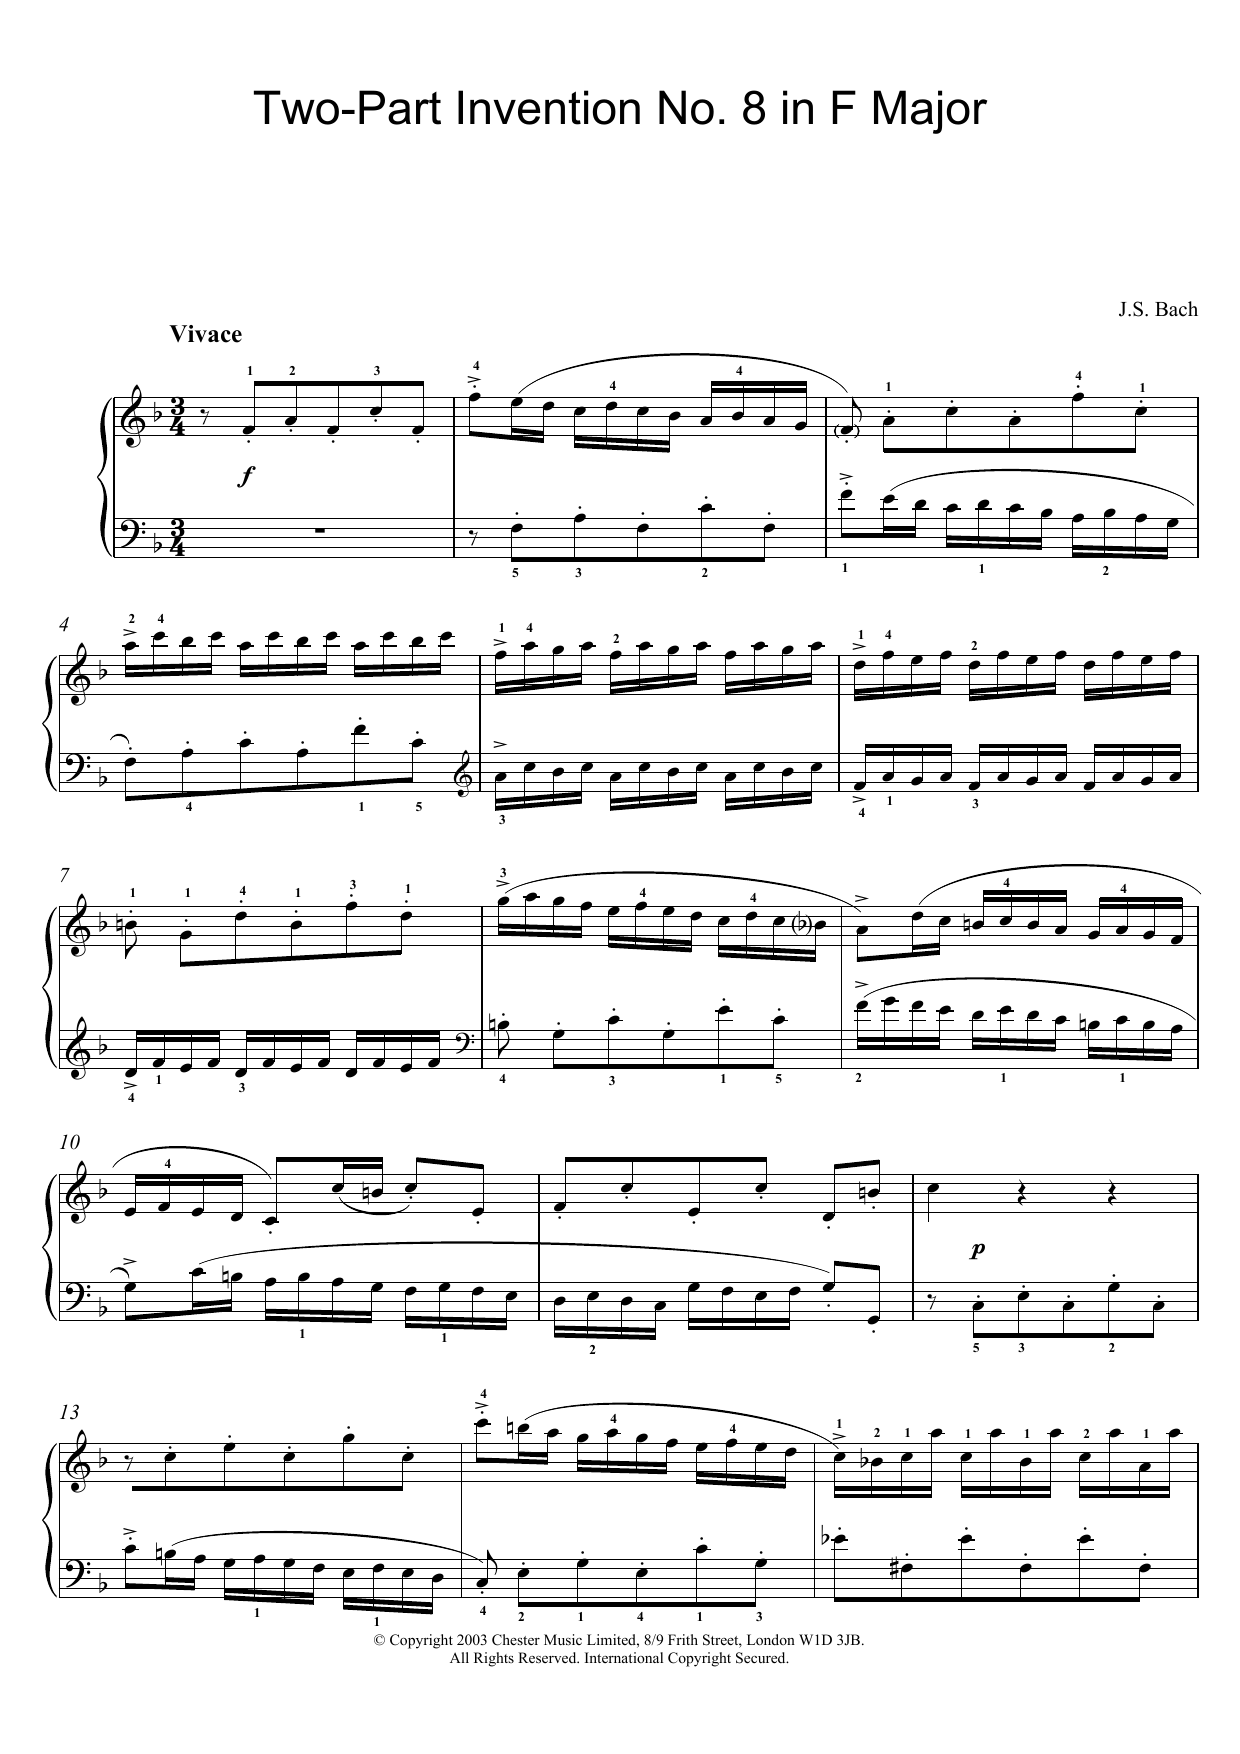 Download Johann Sebastian Bach Two-Part Invention No. 8 in F Major Sheet Music